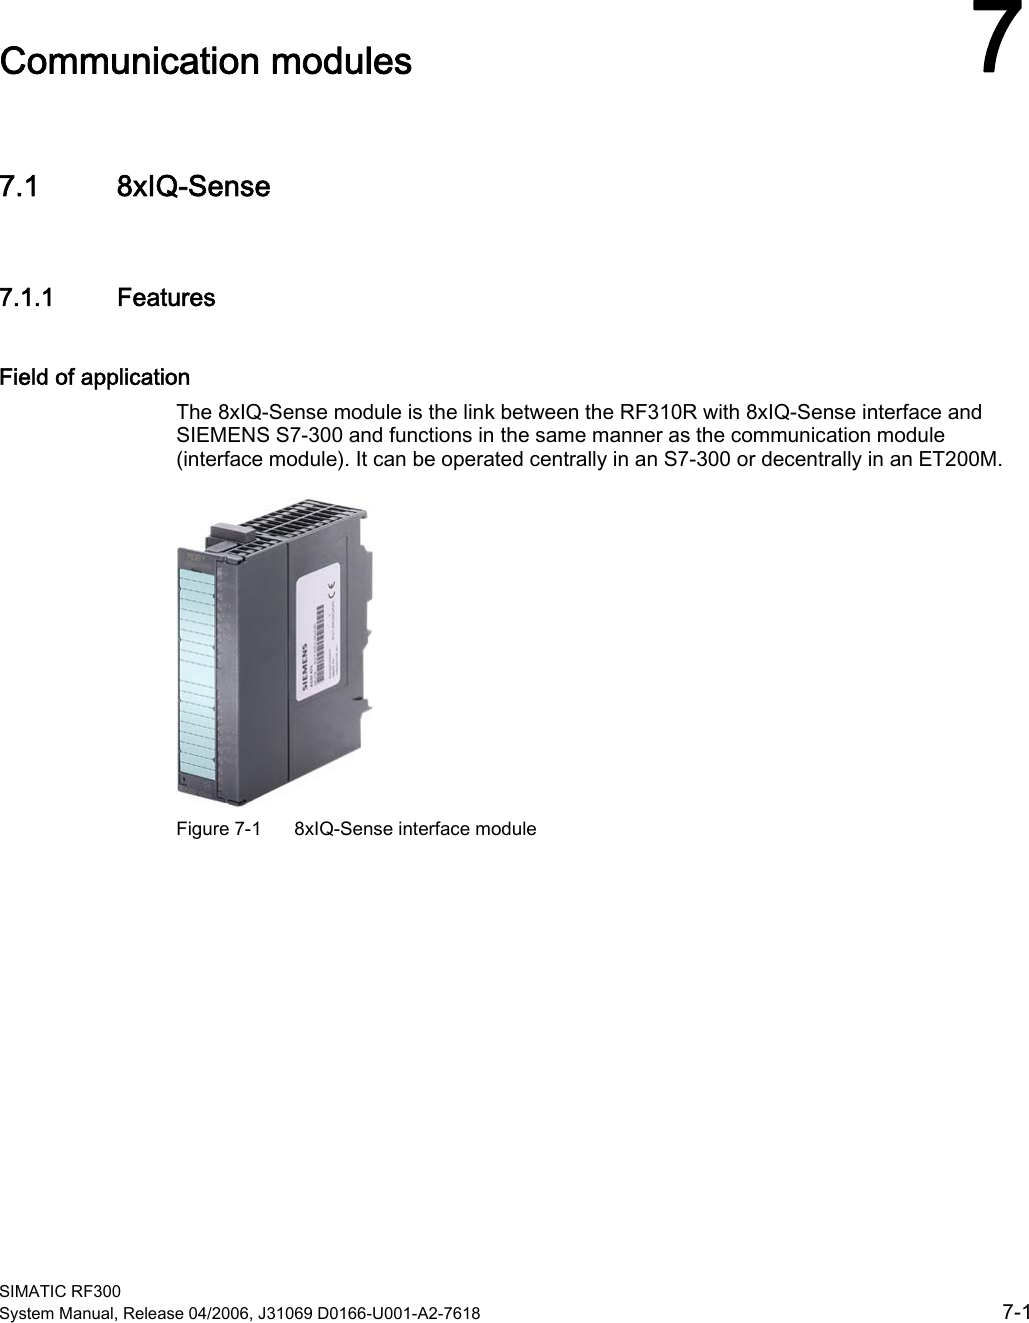  SIMATIC RF300 System Manual, Release 04/2006, J31069 D0166-U001-A2-7618  7-1 Communication modules  77.1 7.1 8xIQ-Sense 7.1.1  Features Field of application The 8xIQ-Sense module is the link between the RF310R with 8xIQ-Sense interface and SIEMENS S7-300 and functions in the same manner as the communication module (interface module). It can be operated centrally in an S7-300 or decentrally in an ET200M.  Figure 7-1  8xIQ-Sense interface module 